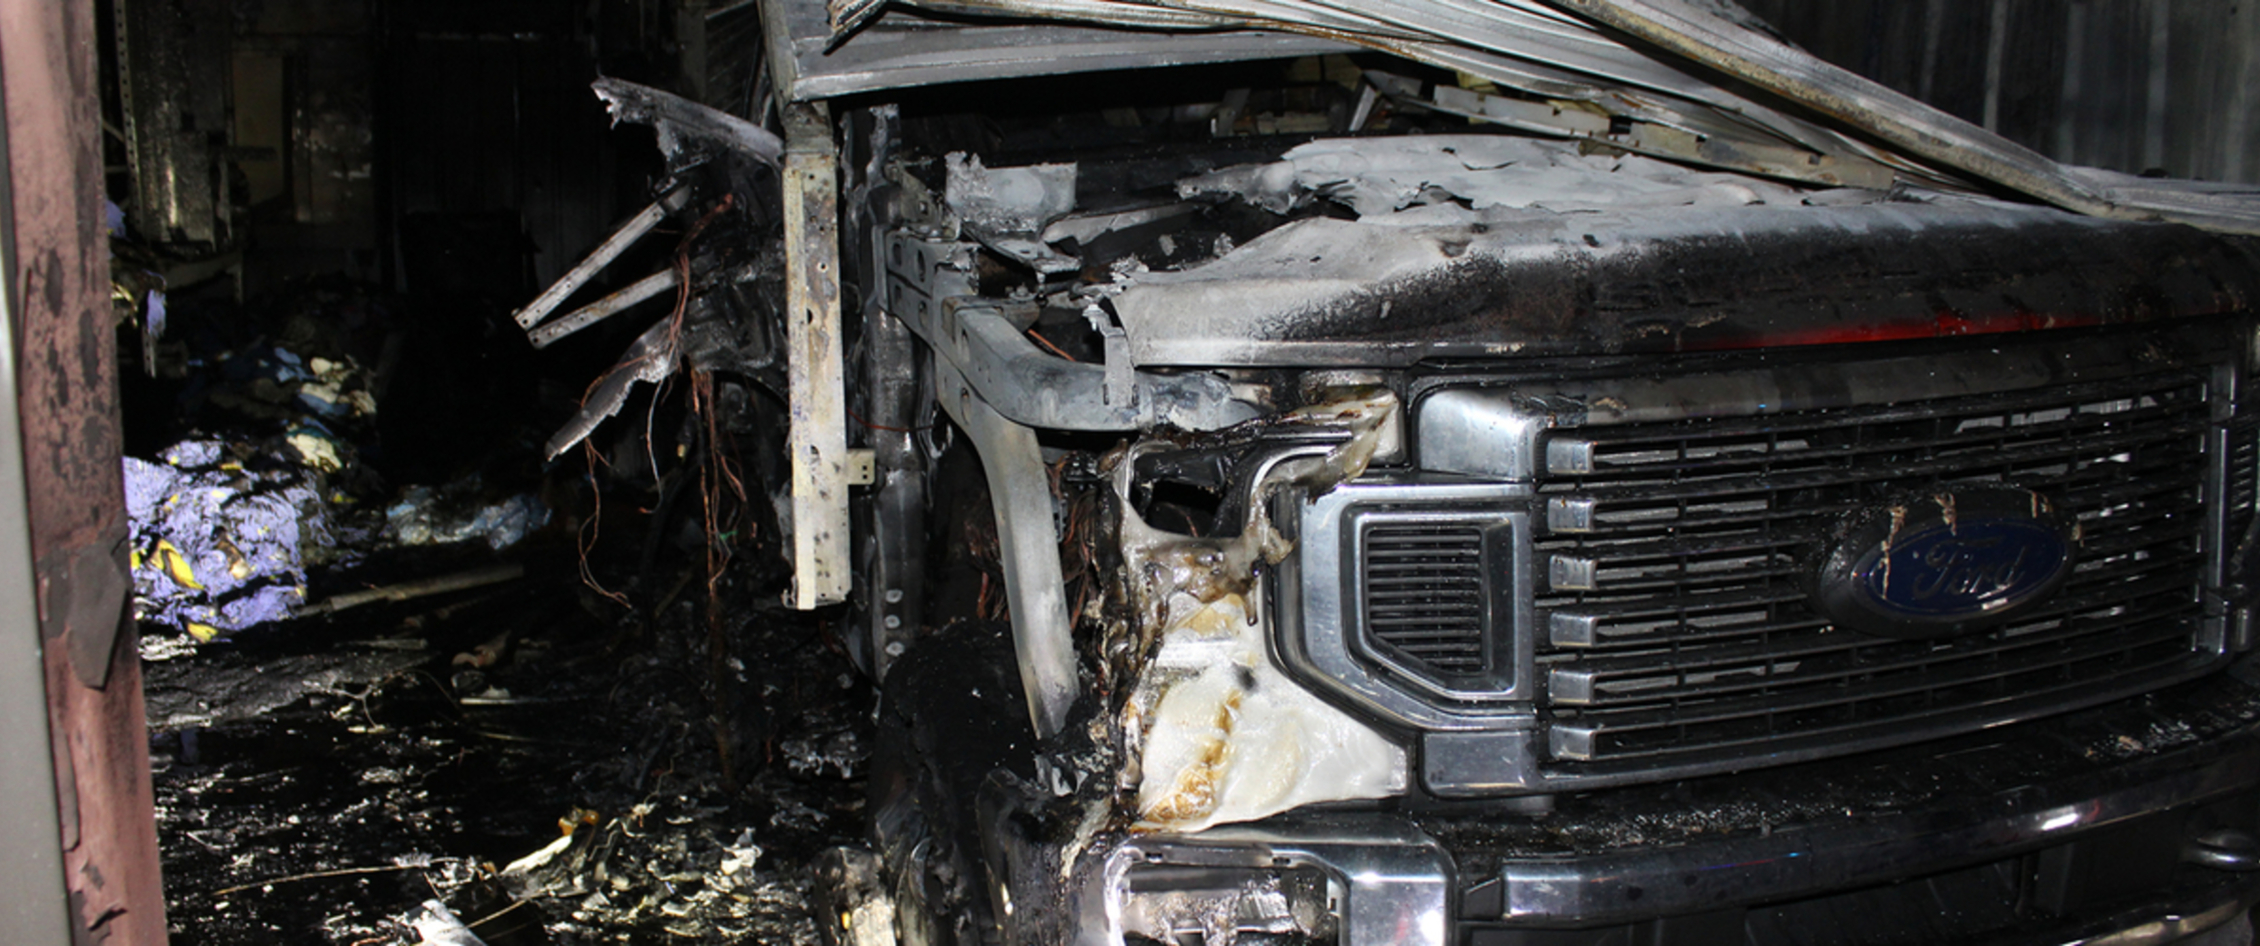 Scene of fire with burned vehicle.